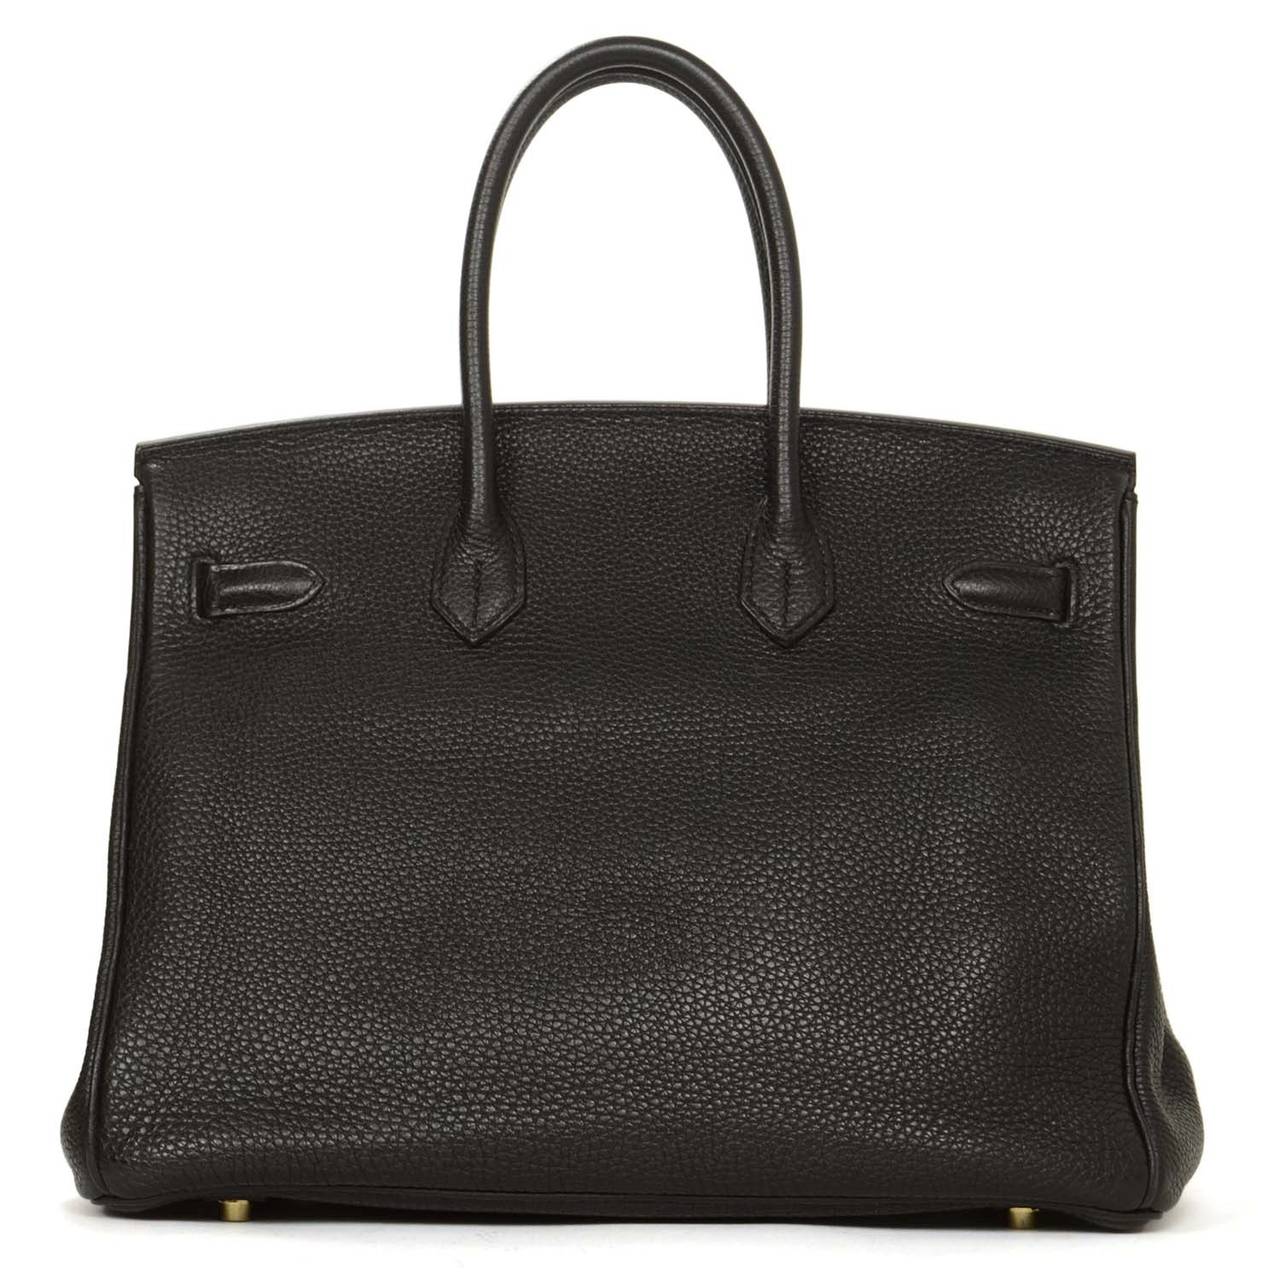 Hermes 2011 Black Clemence Leather 35 cm Birkin Bag GHW
Features double rolled leather handles and draw strap closure

-Made in: FRANCE
-Year of Production: 2011
-Color: Black
-Hardware: Gold plated
-Materials: Clemence leather and